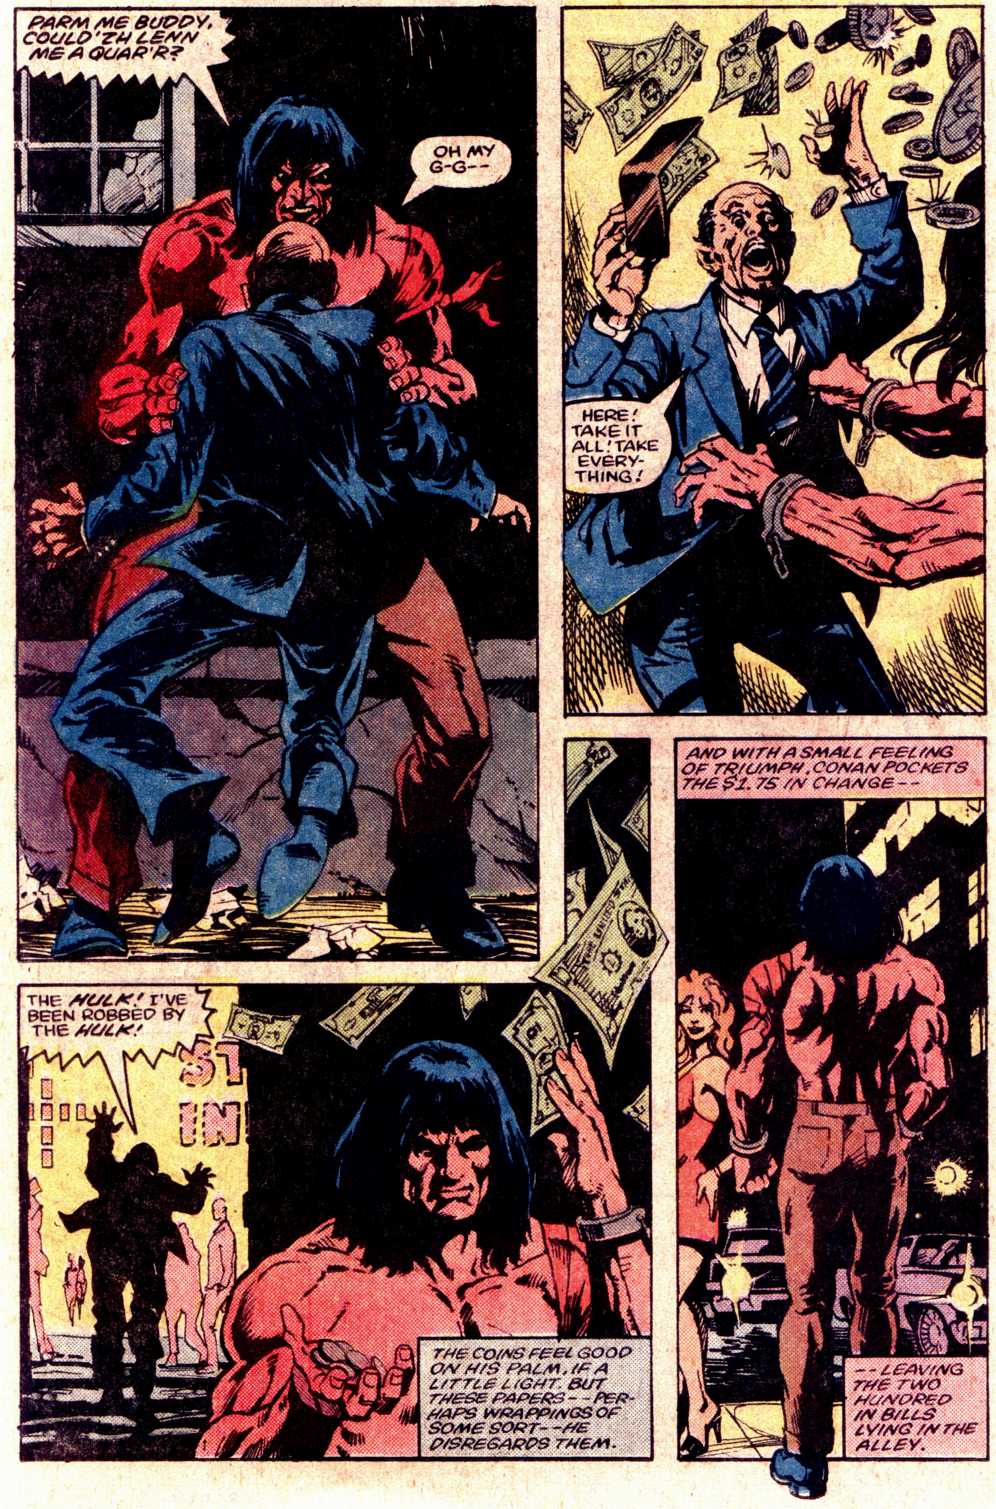 What If? (1977) issue 43 - Conan the Barbarian were stranded in the 20th century - Page 10